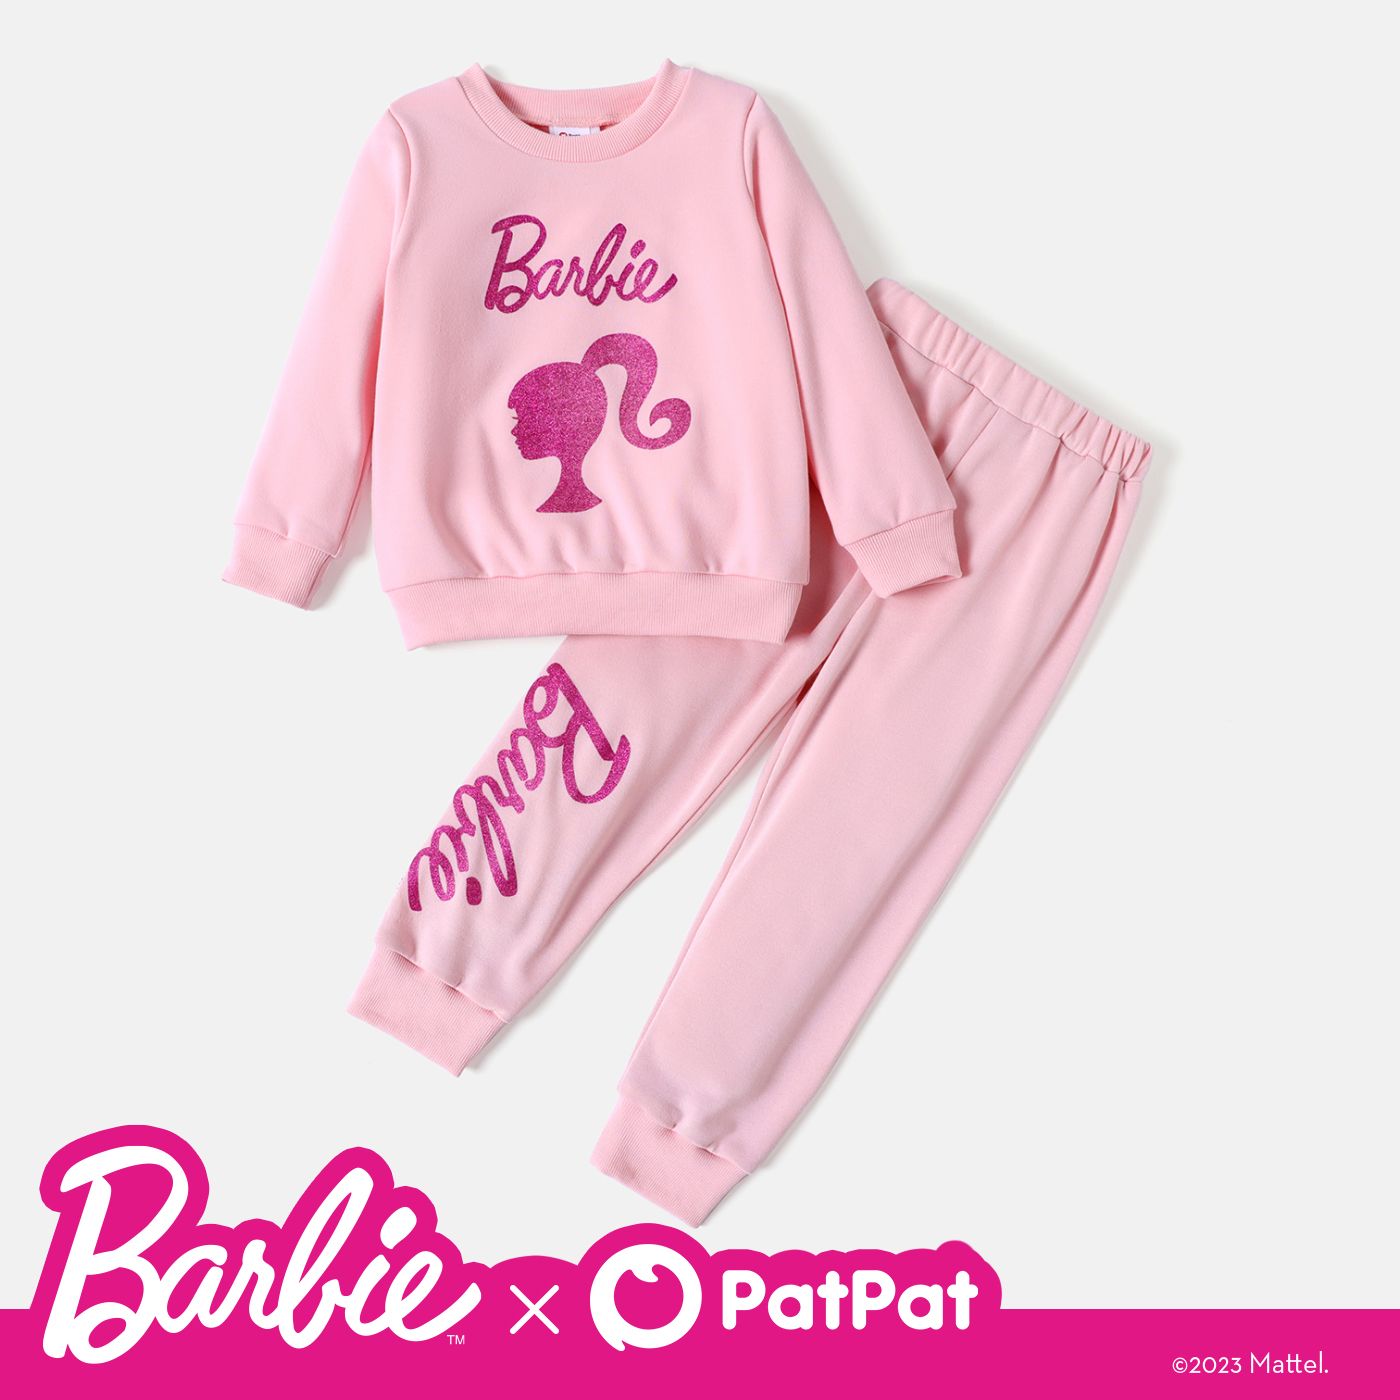 Barbie 2pcs Toddler Girl Character Letter Print Cotton Pullover Sweatshirt and Elasticized Pants Set